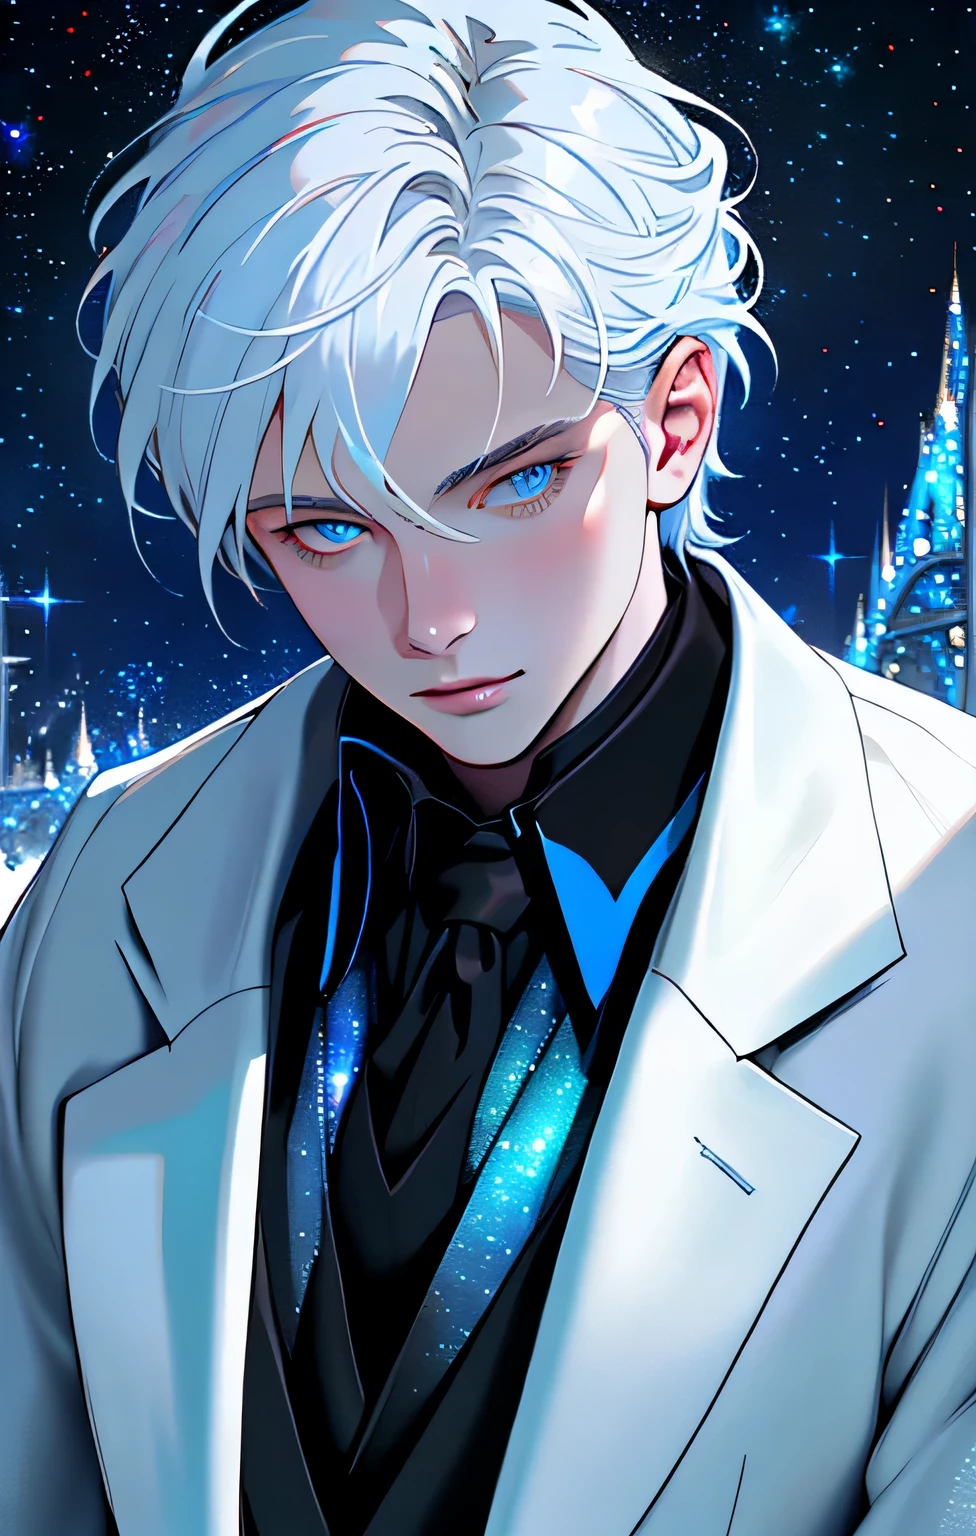 Close up face, European face, white man, shoulder-length white hair, tuquoise blue eyes, black pants and blue dress shirt. starry sky (masterpiece, best quality: 1.4), (absurdities, highres, ultra detailed: 1.2), (1 handsome man: 1.4), (using dark magic: 1.4), red magic, playful illustrations, imaginative overlays, artistic fusion, fantastic scenes, evocative narratives, stunning visuals
